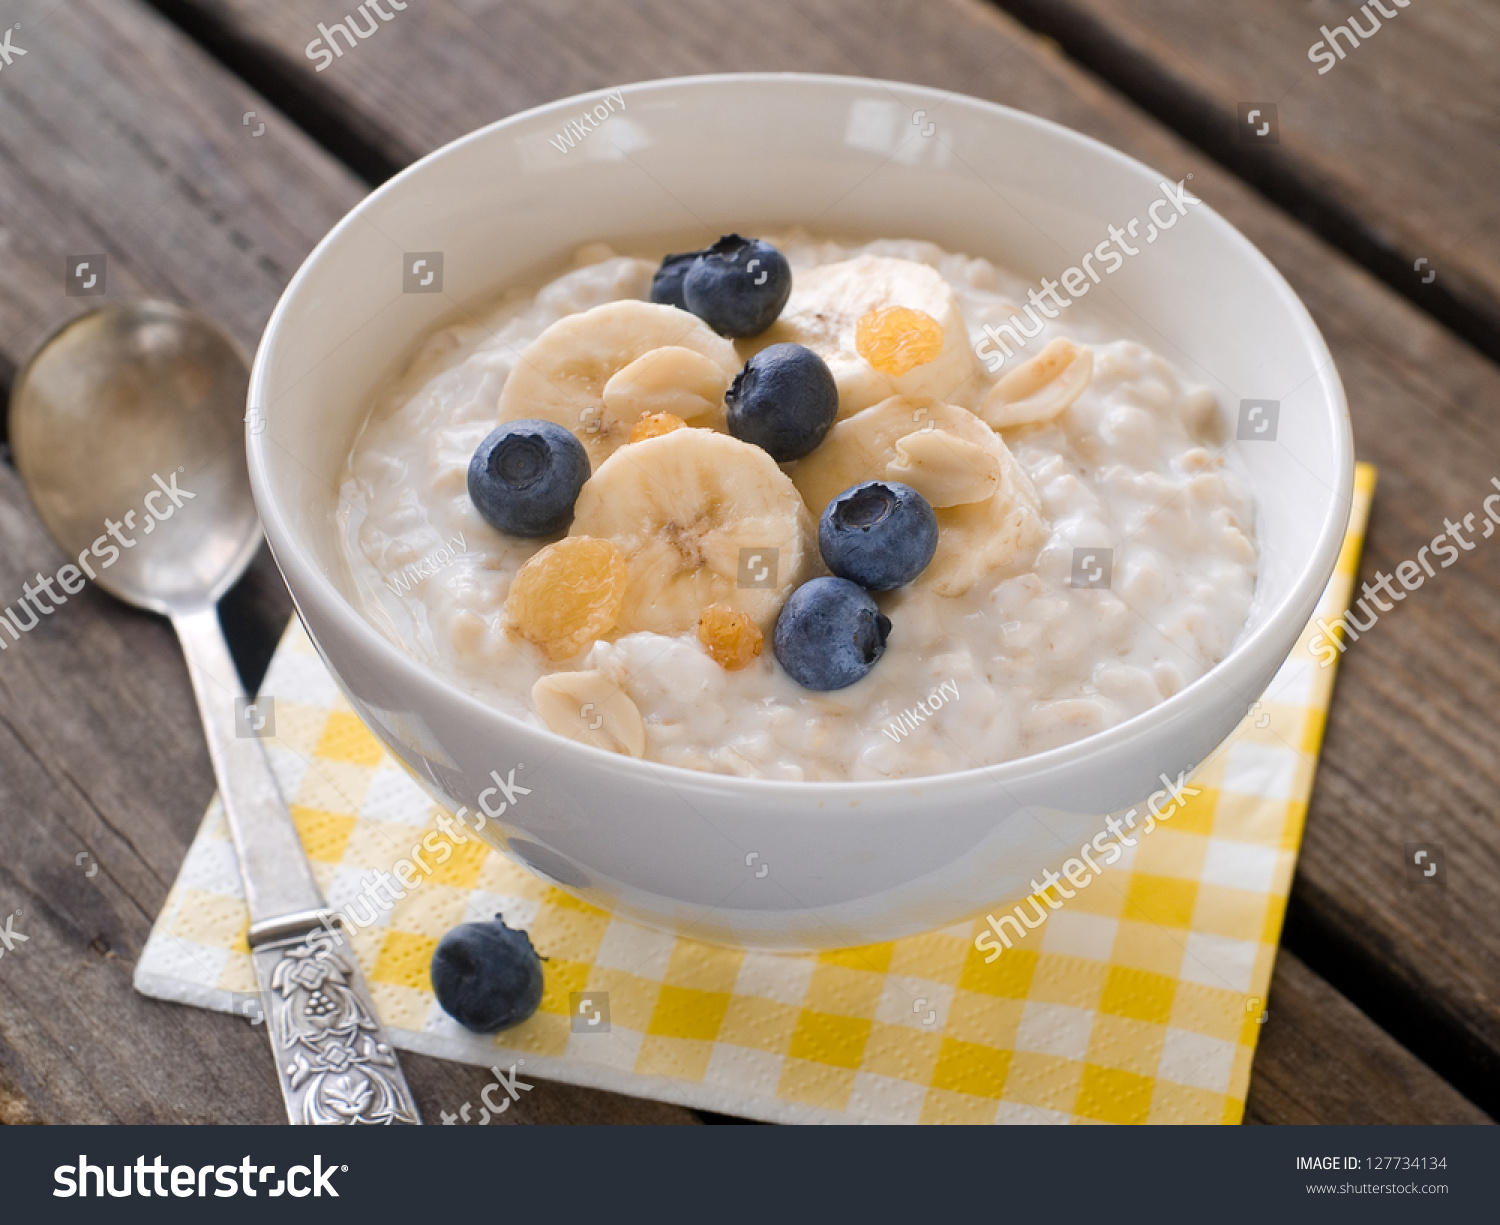 http://image.shutterstock.com/z/stock-photo-bowl-of-oatmeal-porridge-with-bananas-and-blueberry-selective-focus-127734134.jpg